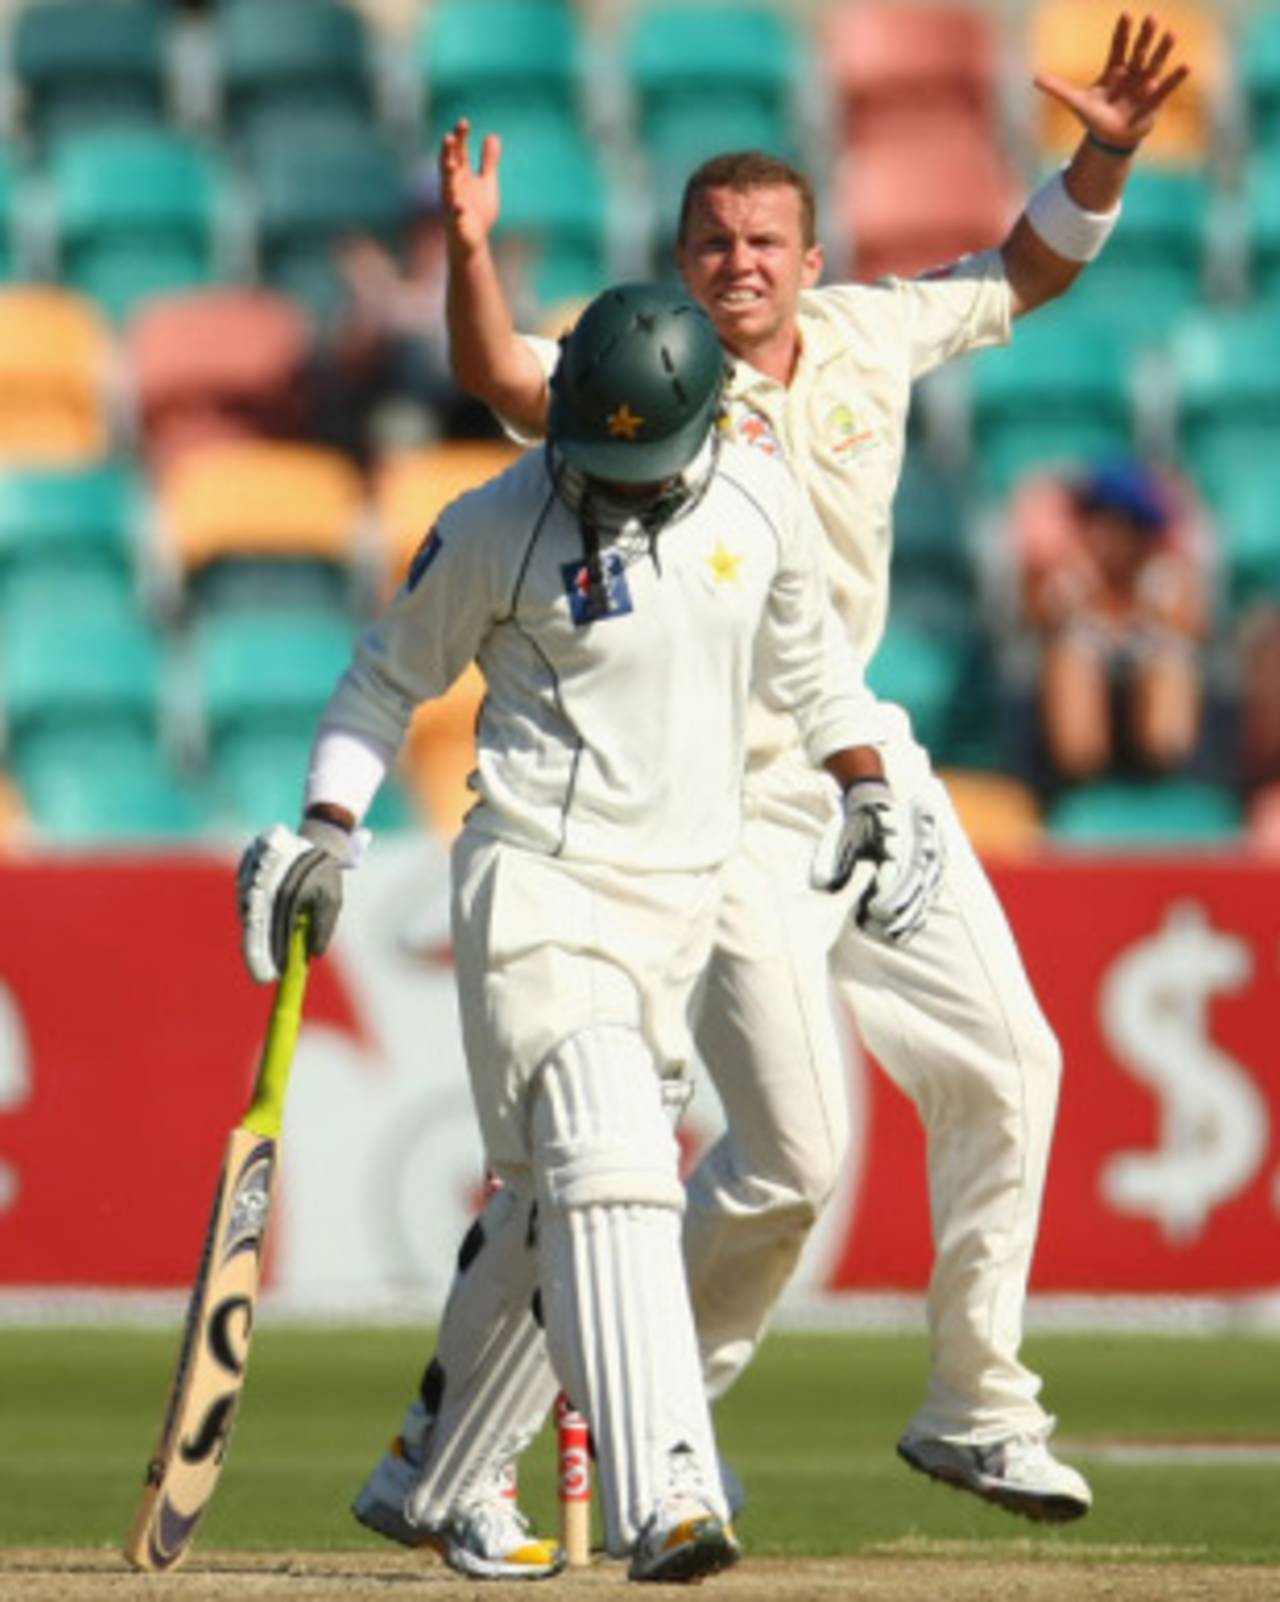 Peter Siddle collects the wicket of Imran Farhat, 3rd Test, Australia v Pakistan, 2nd day, Hobart, January 15, 2010